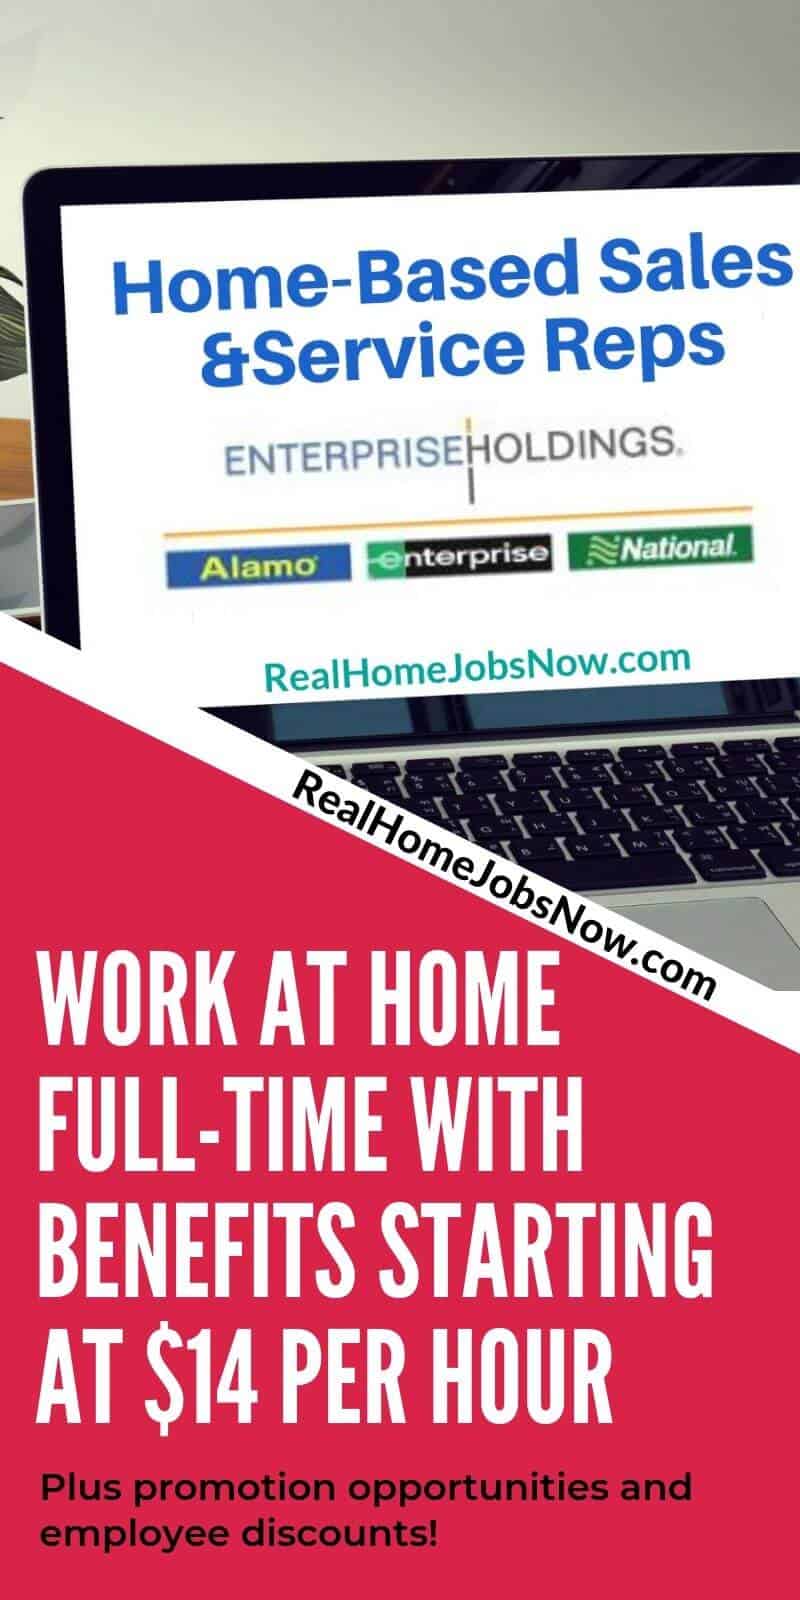 Enterprise Rent a Car routinely hires for online jobs! Competitive pay, full benefits, and even some equipment can be yours with Enterprise work from home jobs.